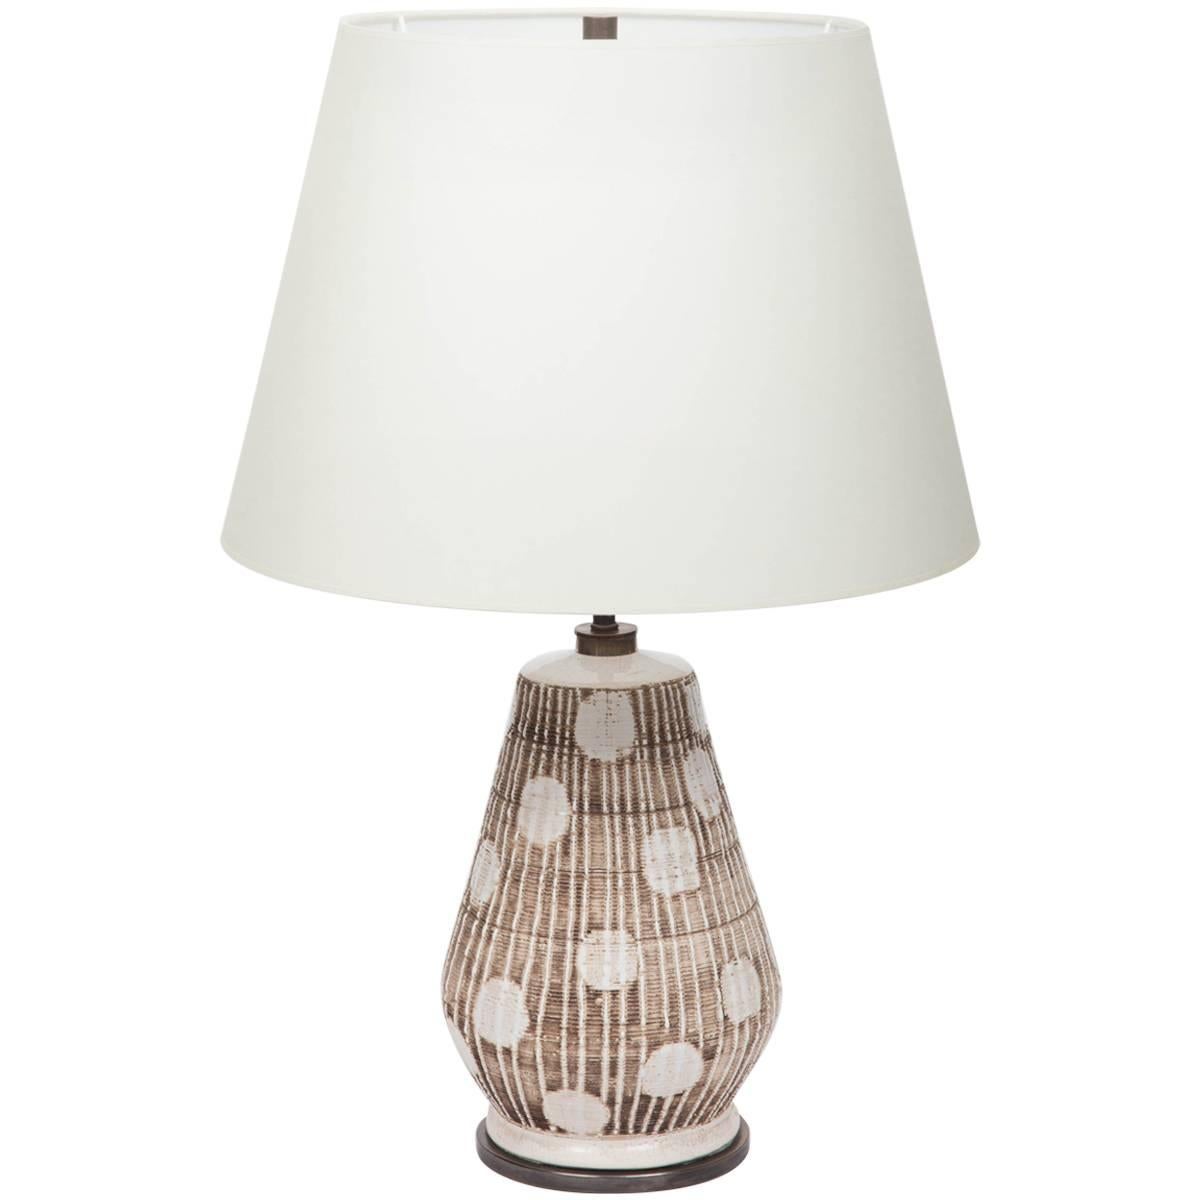 Ceramic Table Lamp in Brown and White with Graphic Dots